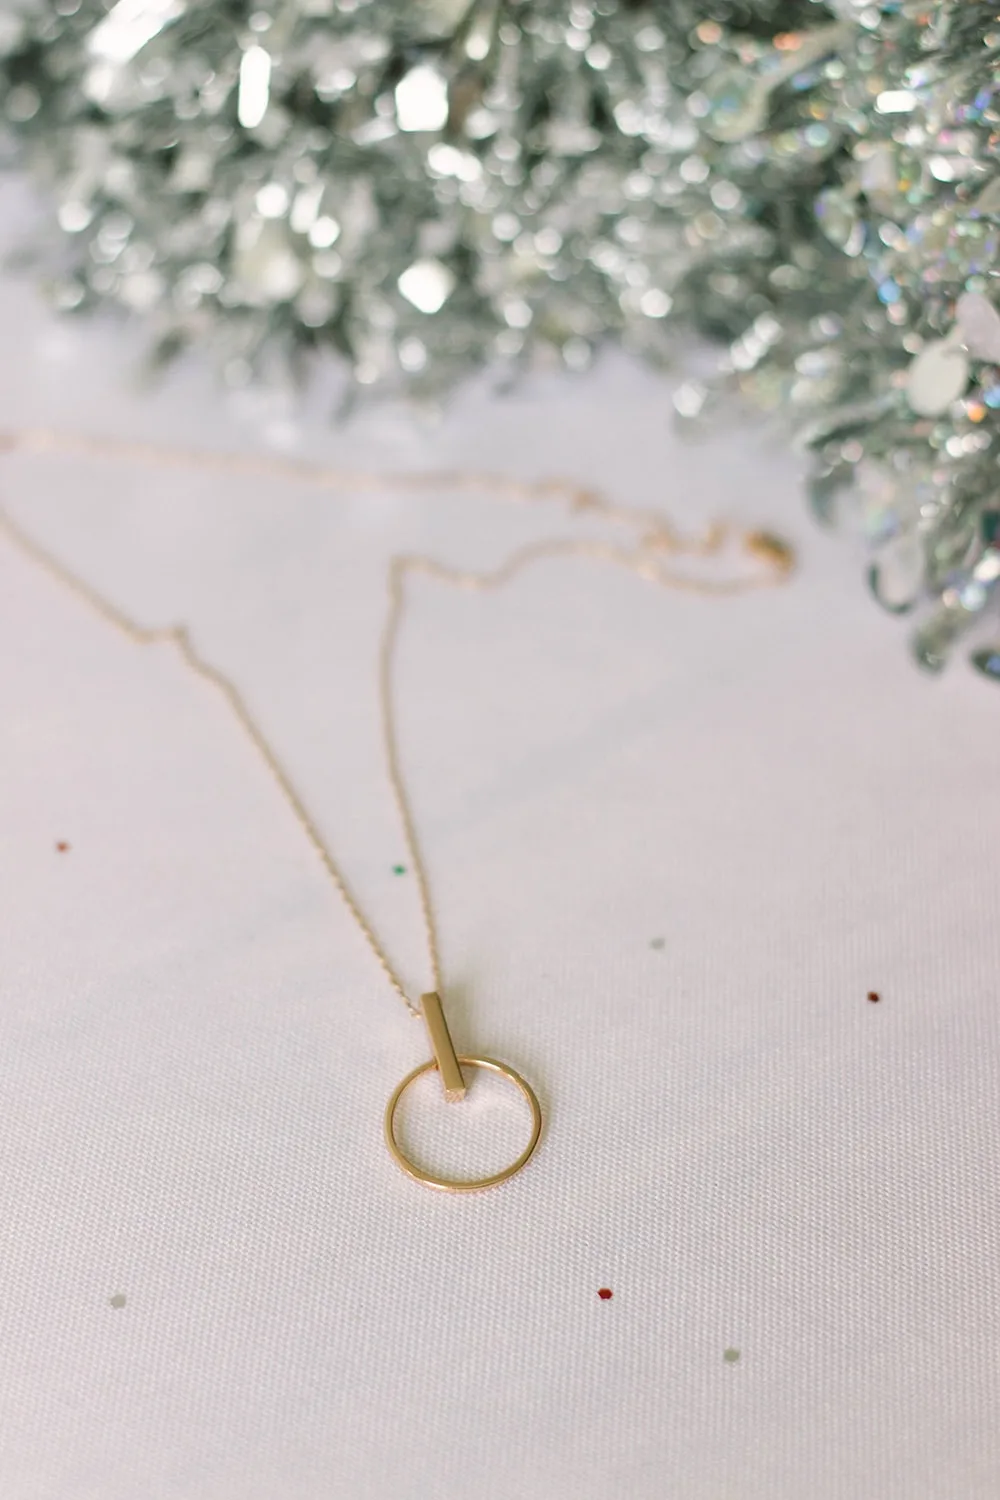 Rose gold necklace in front of tree.